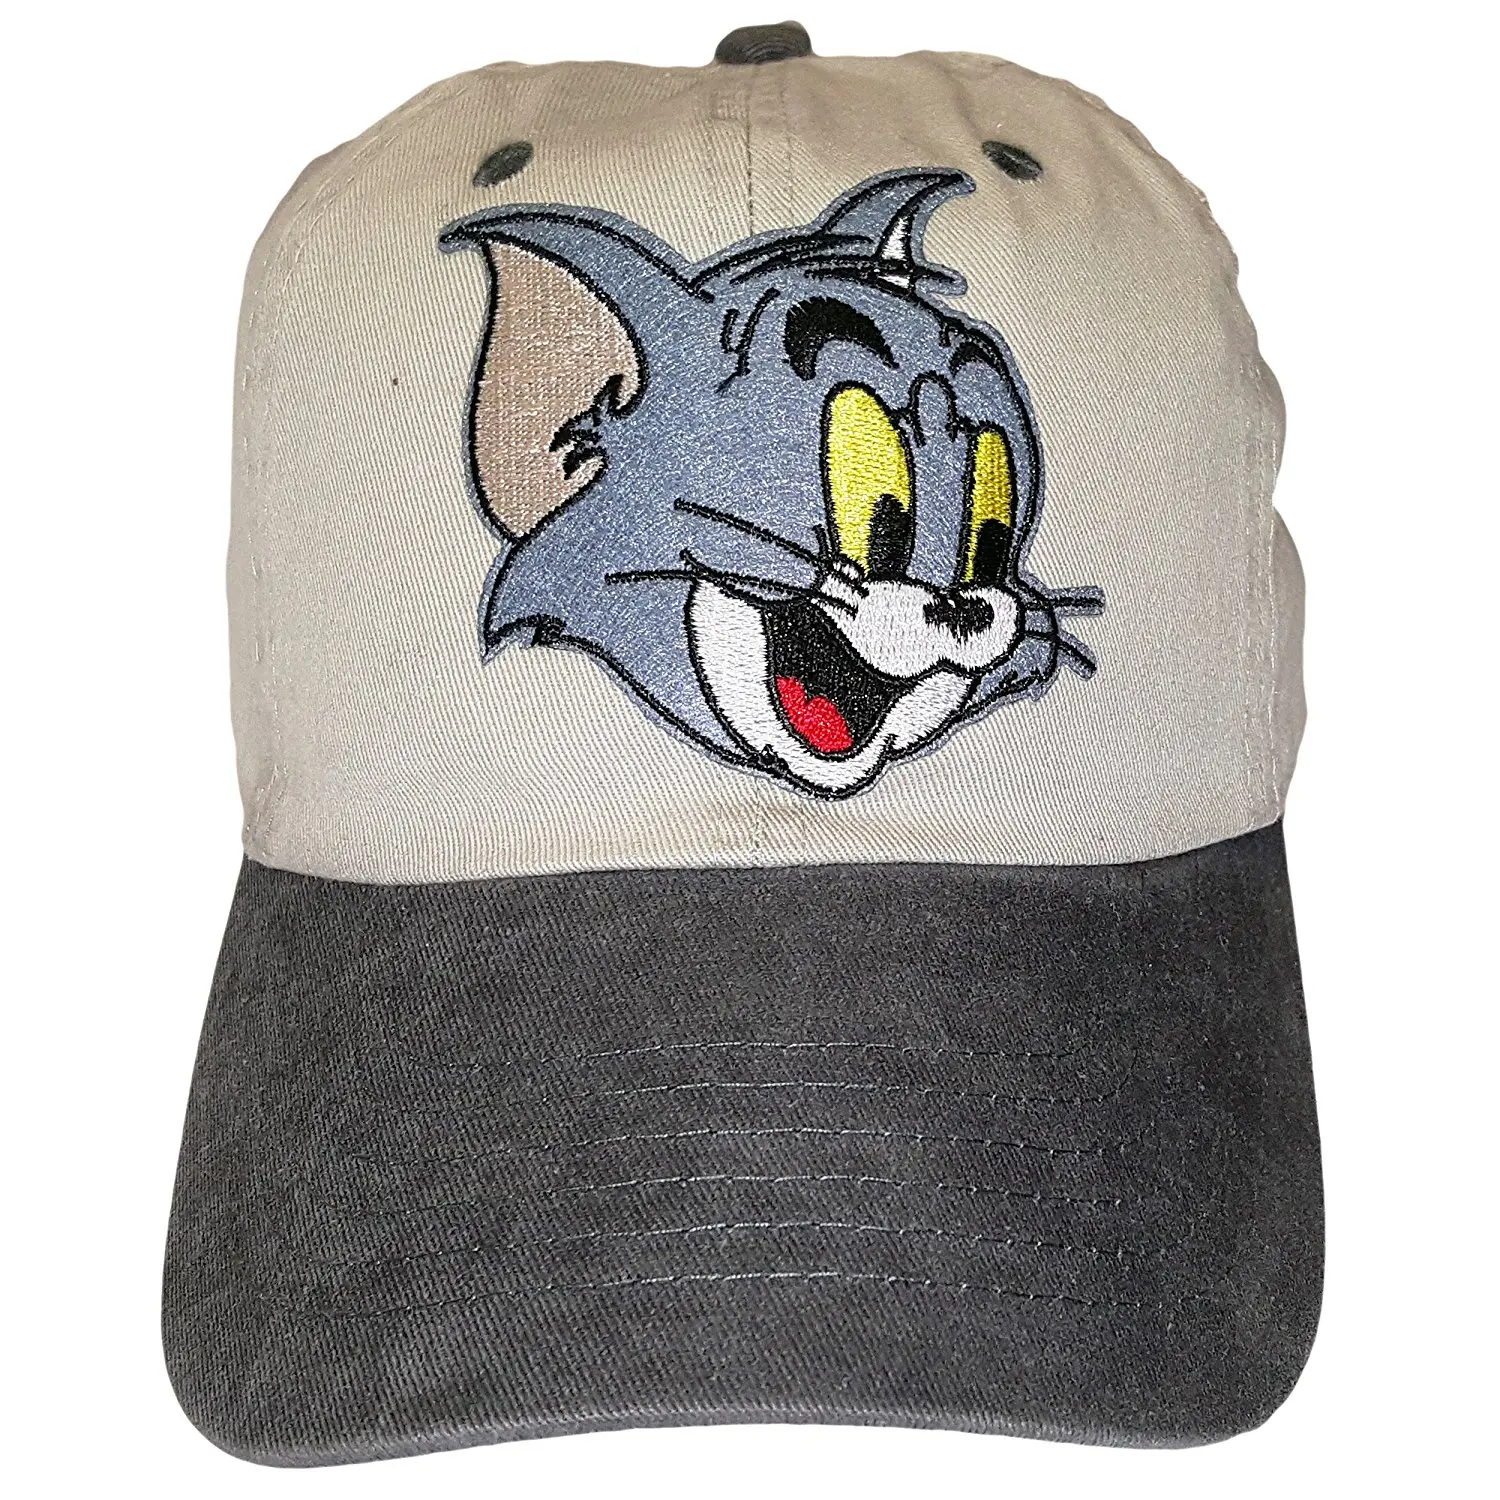 Cheap Jerry Hat, find Jerry Hat deals on line at Alibaba.com